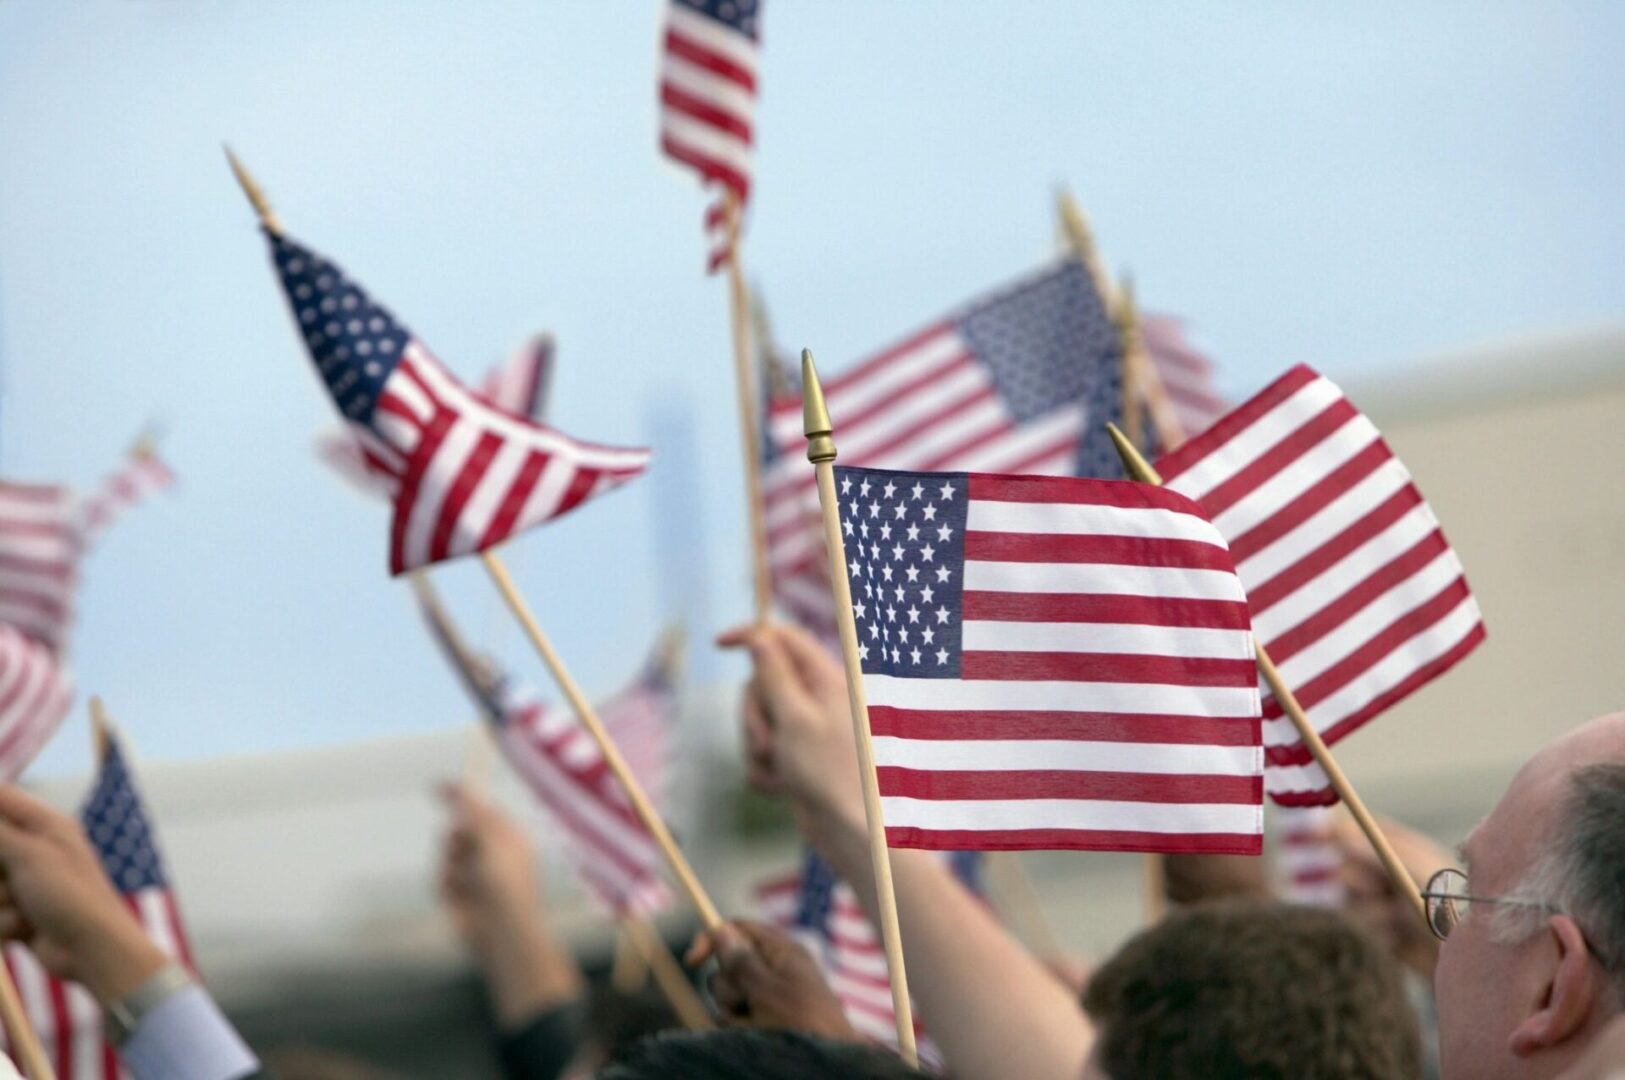 A group of people holding american flags in the air.